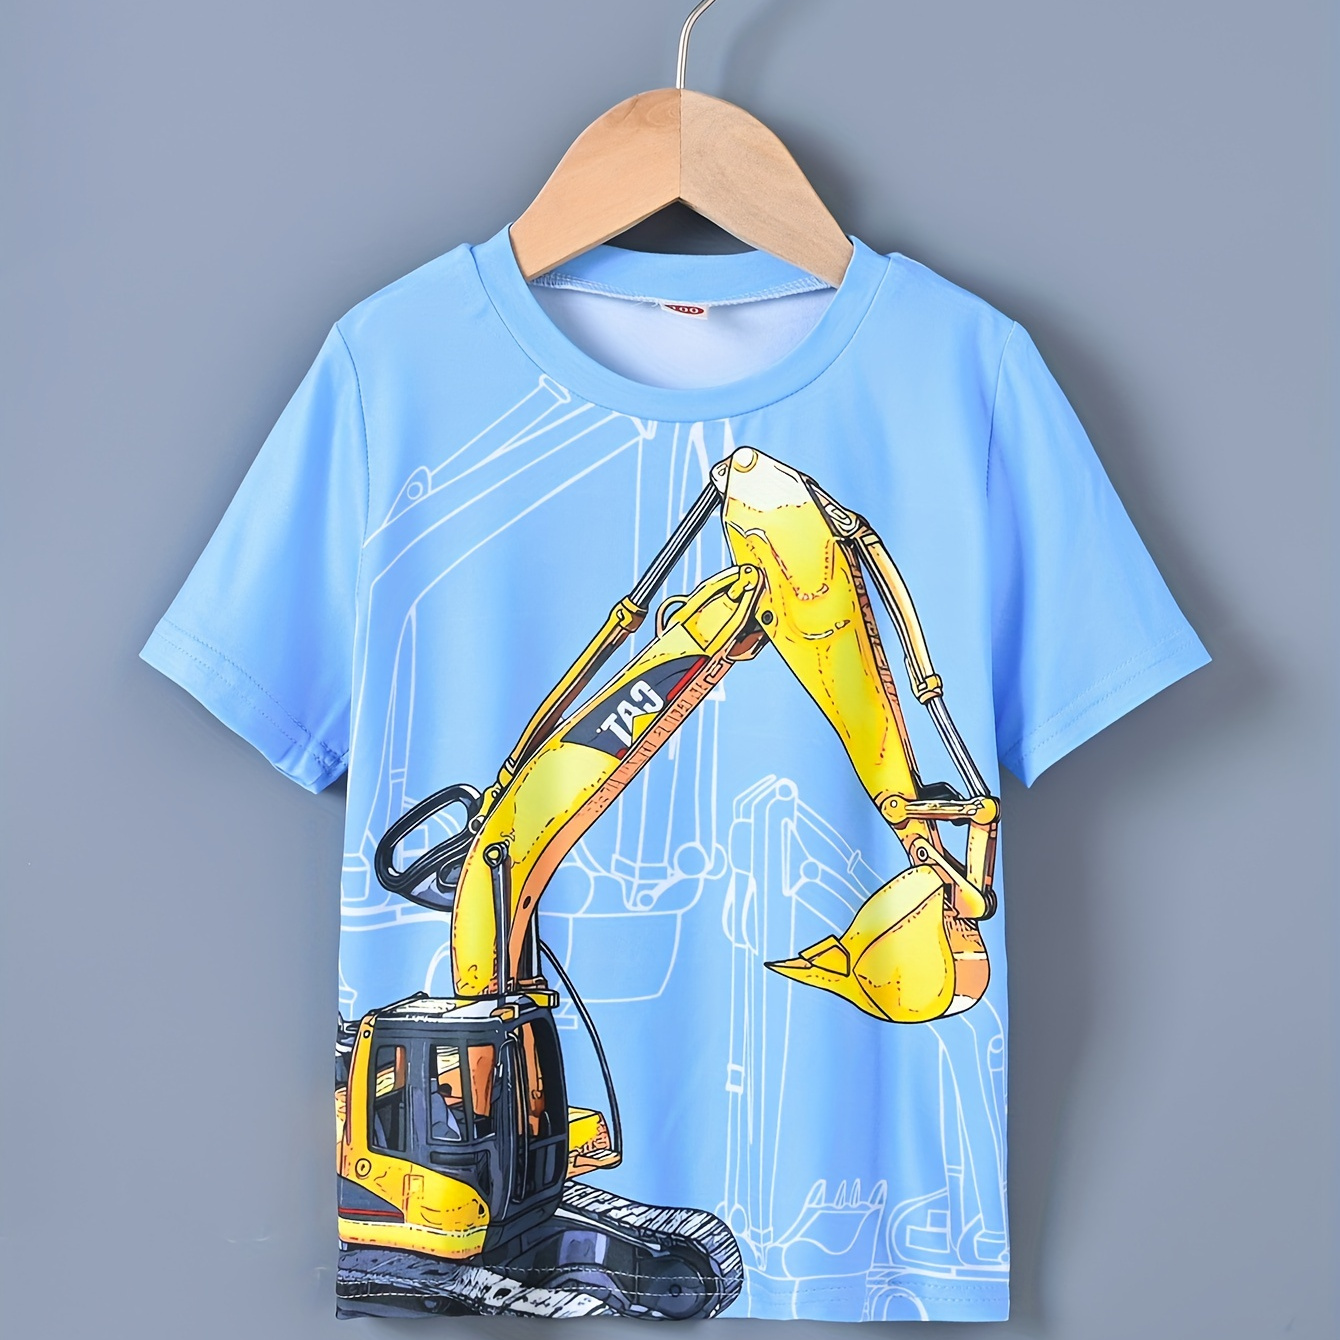 

Excavator Print T Shirt, Tees For Kids Boys, Casual Short Sleeve T-shirt For Summer Spring Fall, Tops As Gifts